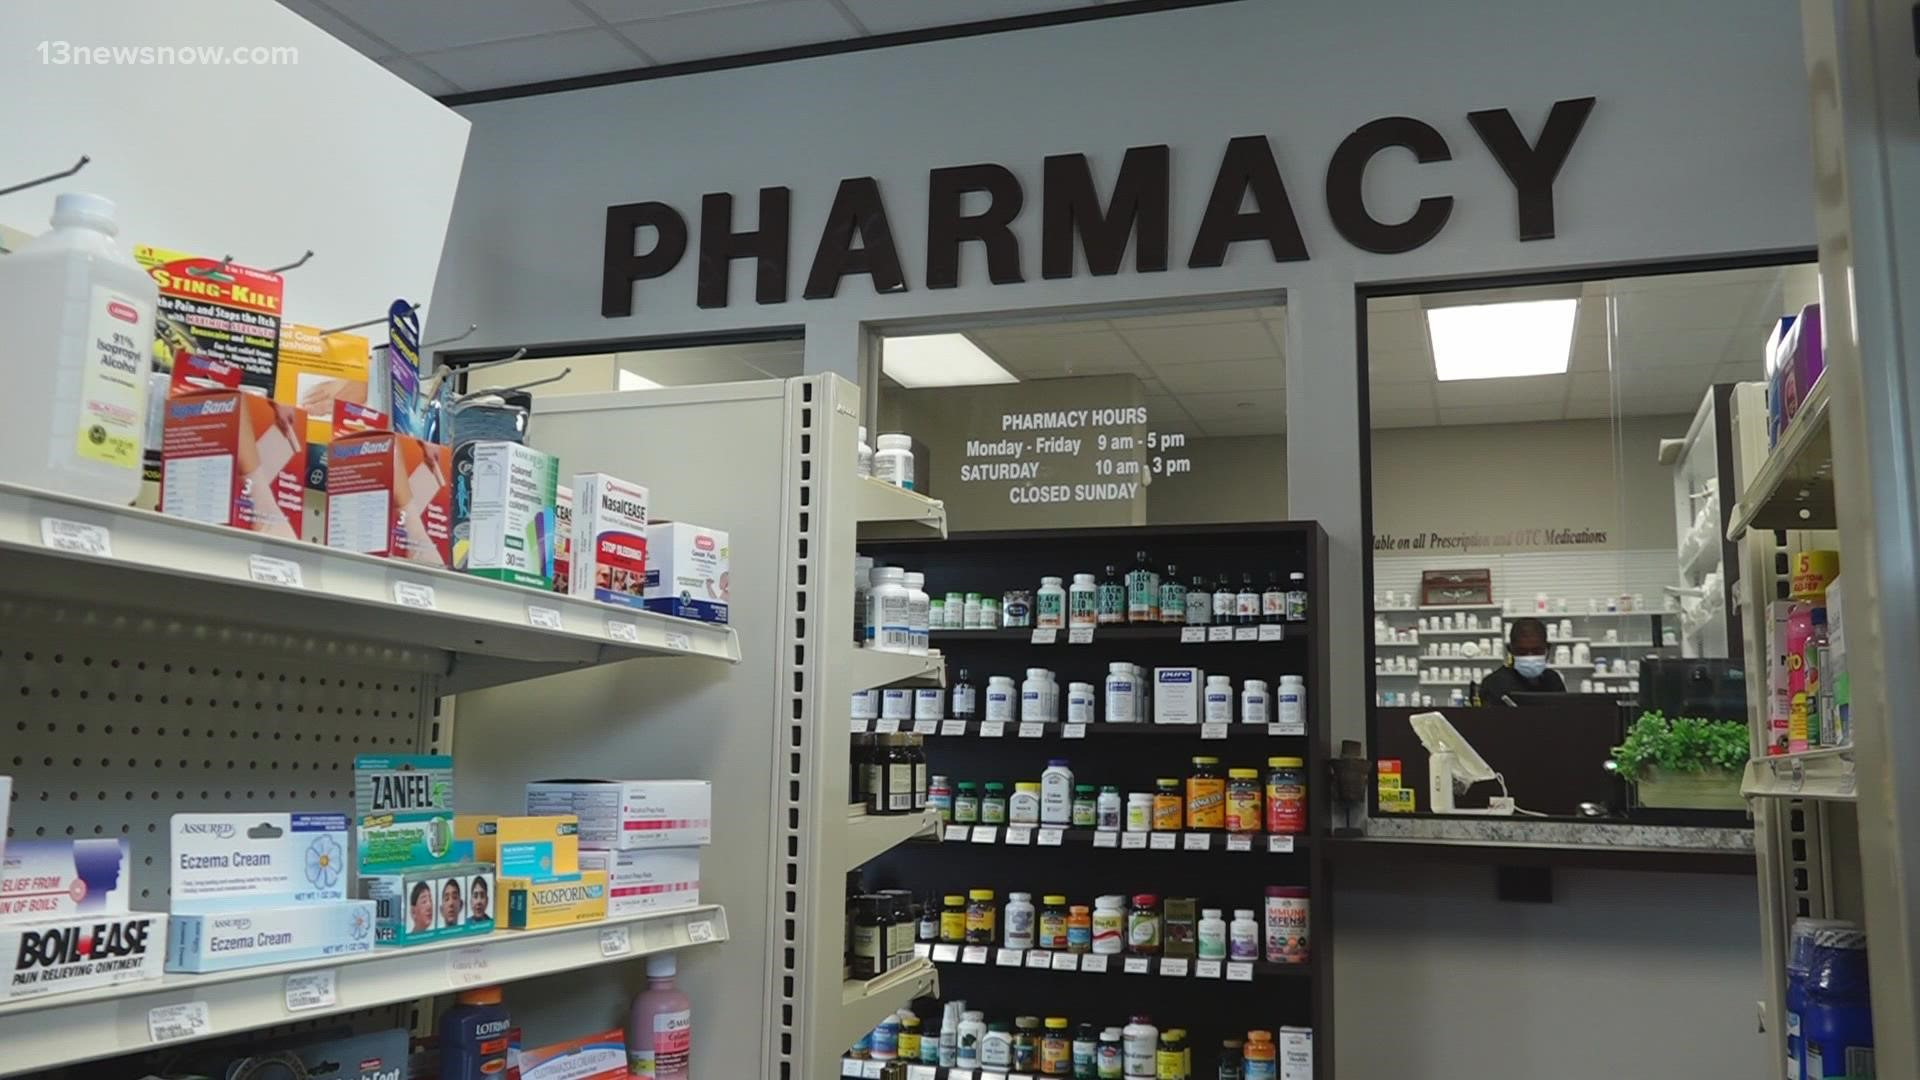 Pharmacies are now looking for more workers after a hectic year of filling prescriptions and administering millions of COVID-19 vaccinations.